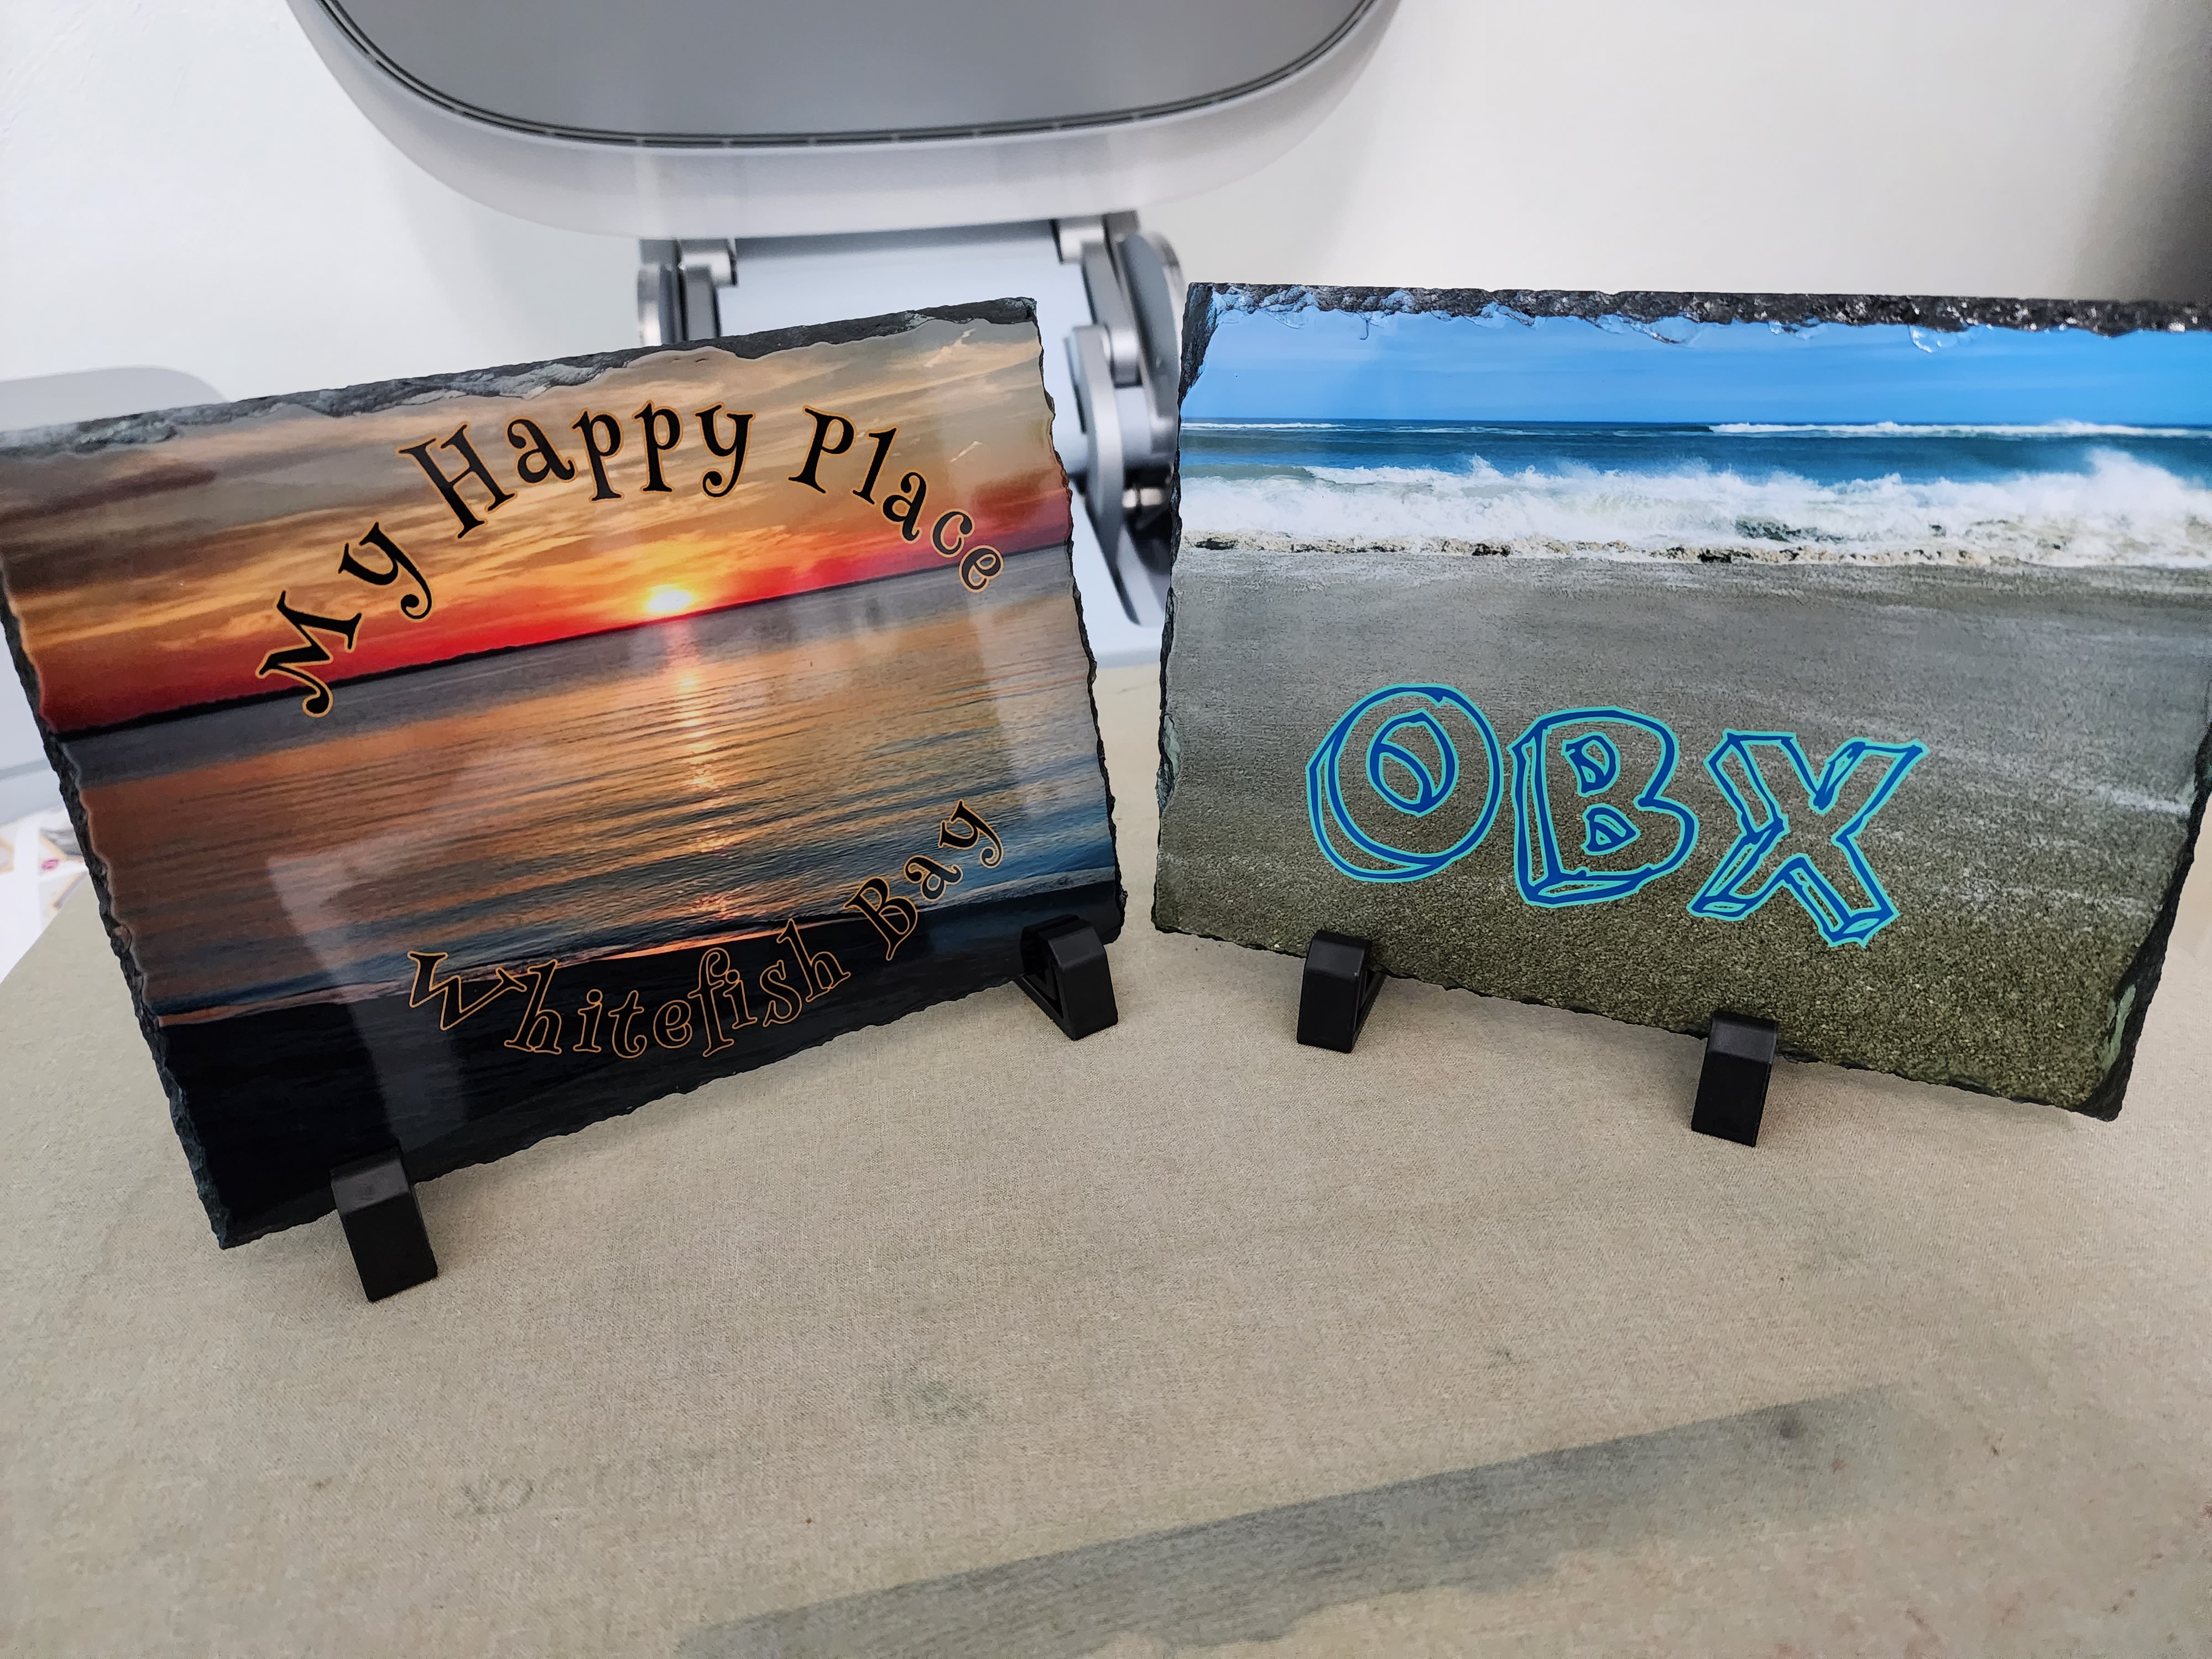 Vacation slates made with sublimation printing